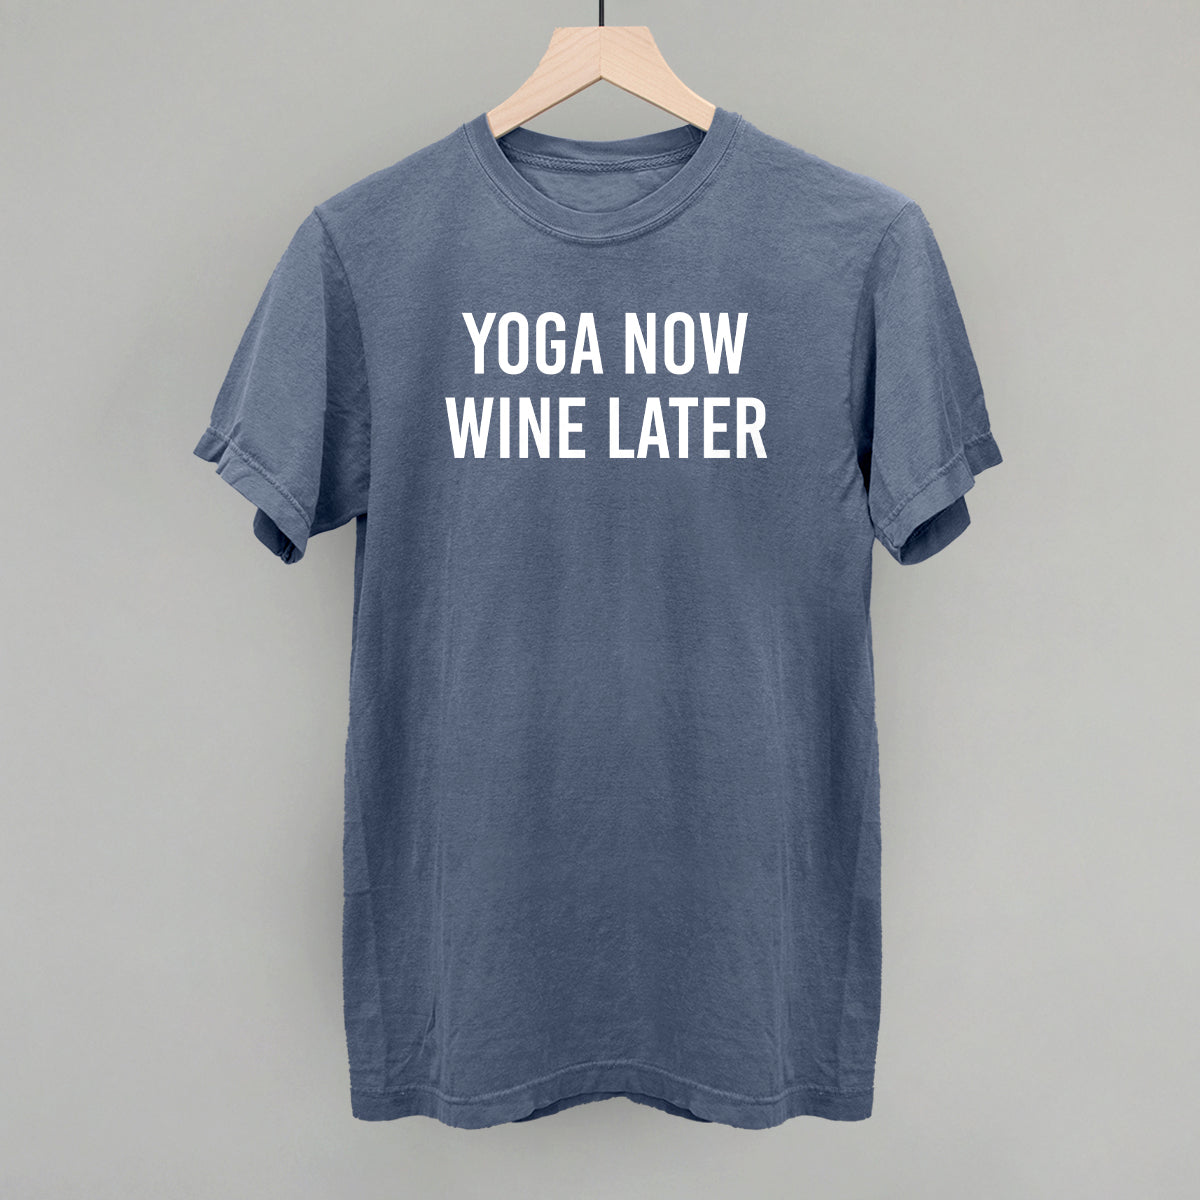 Yoga Now Wine Later